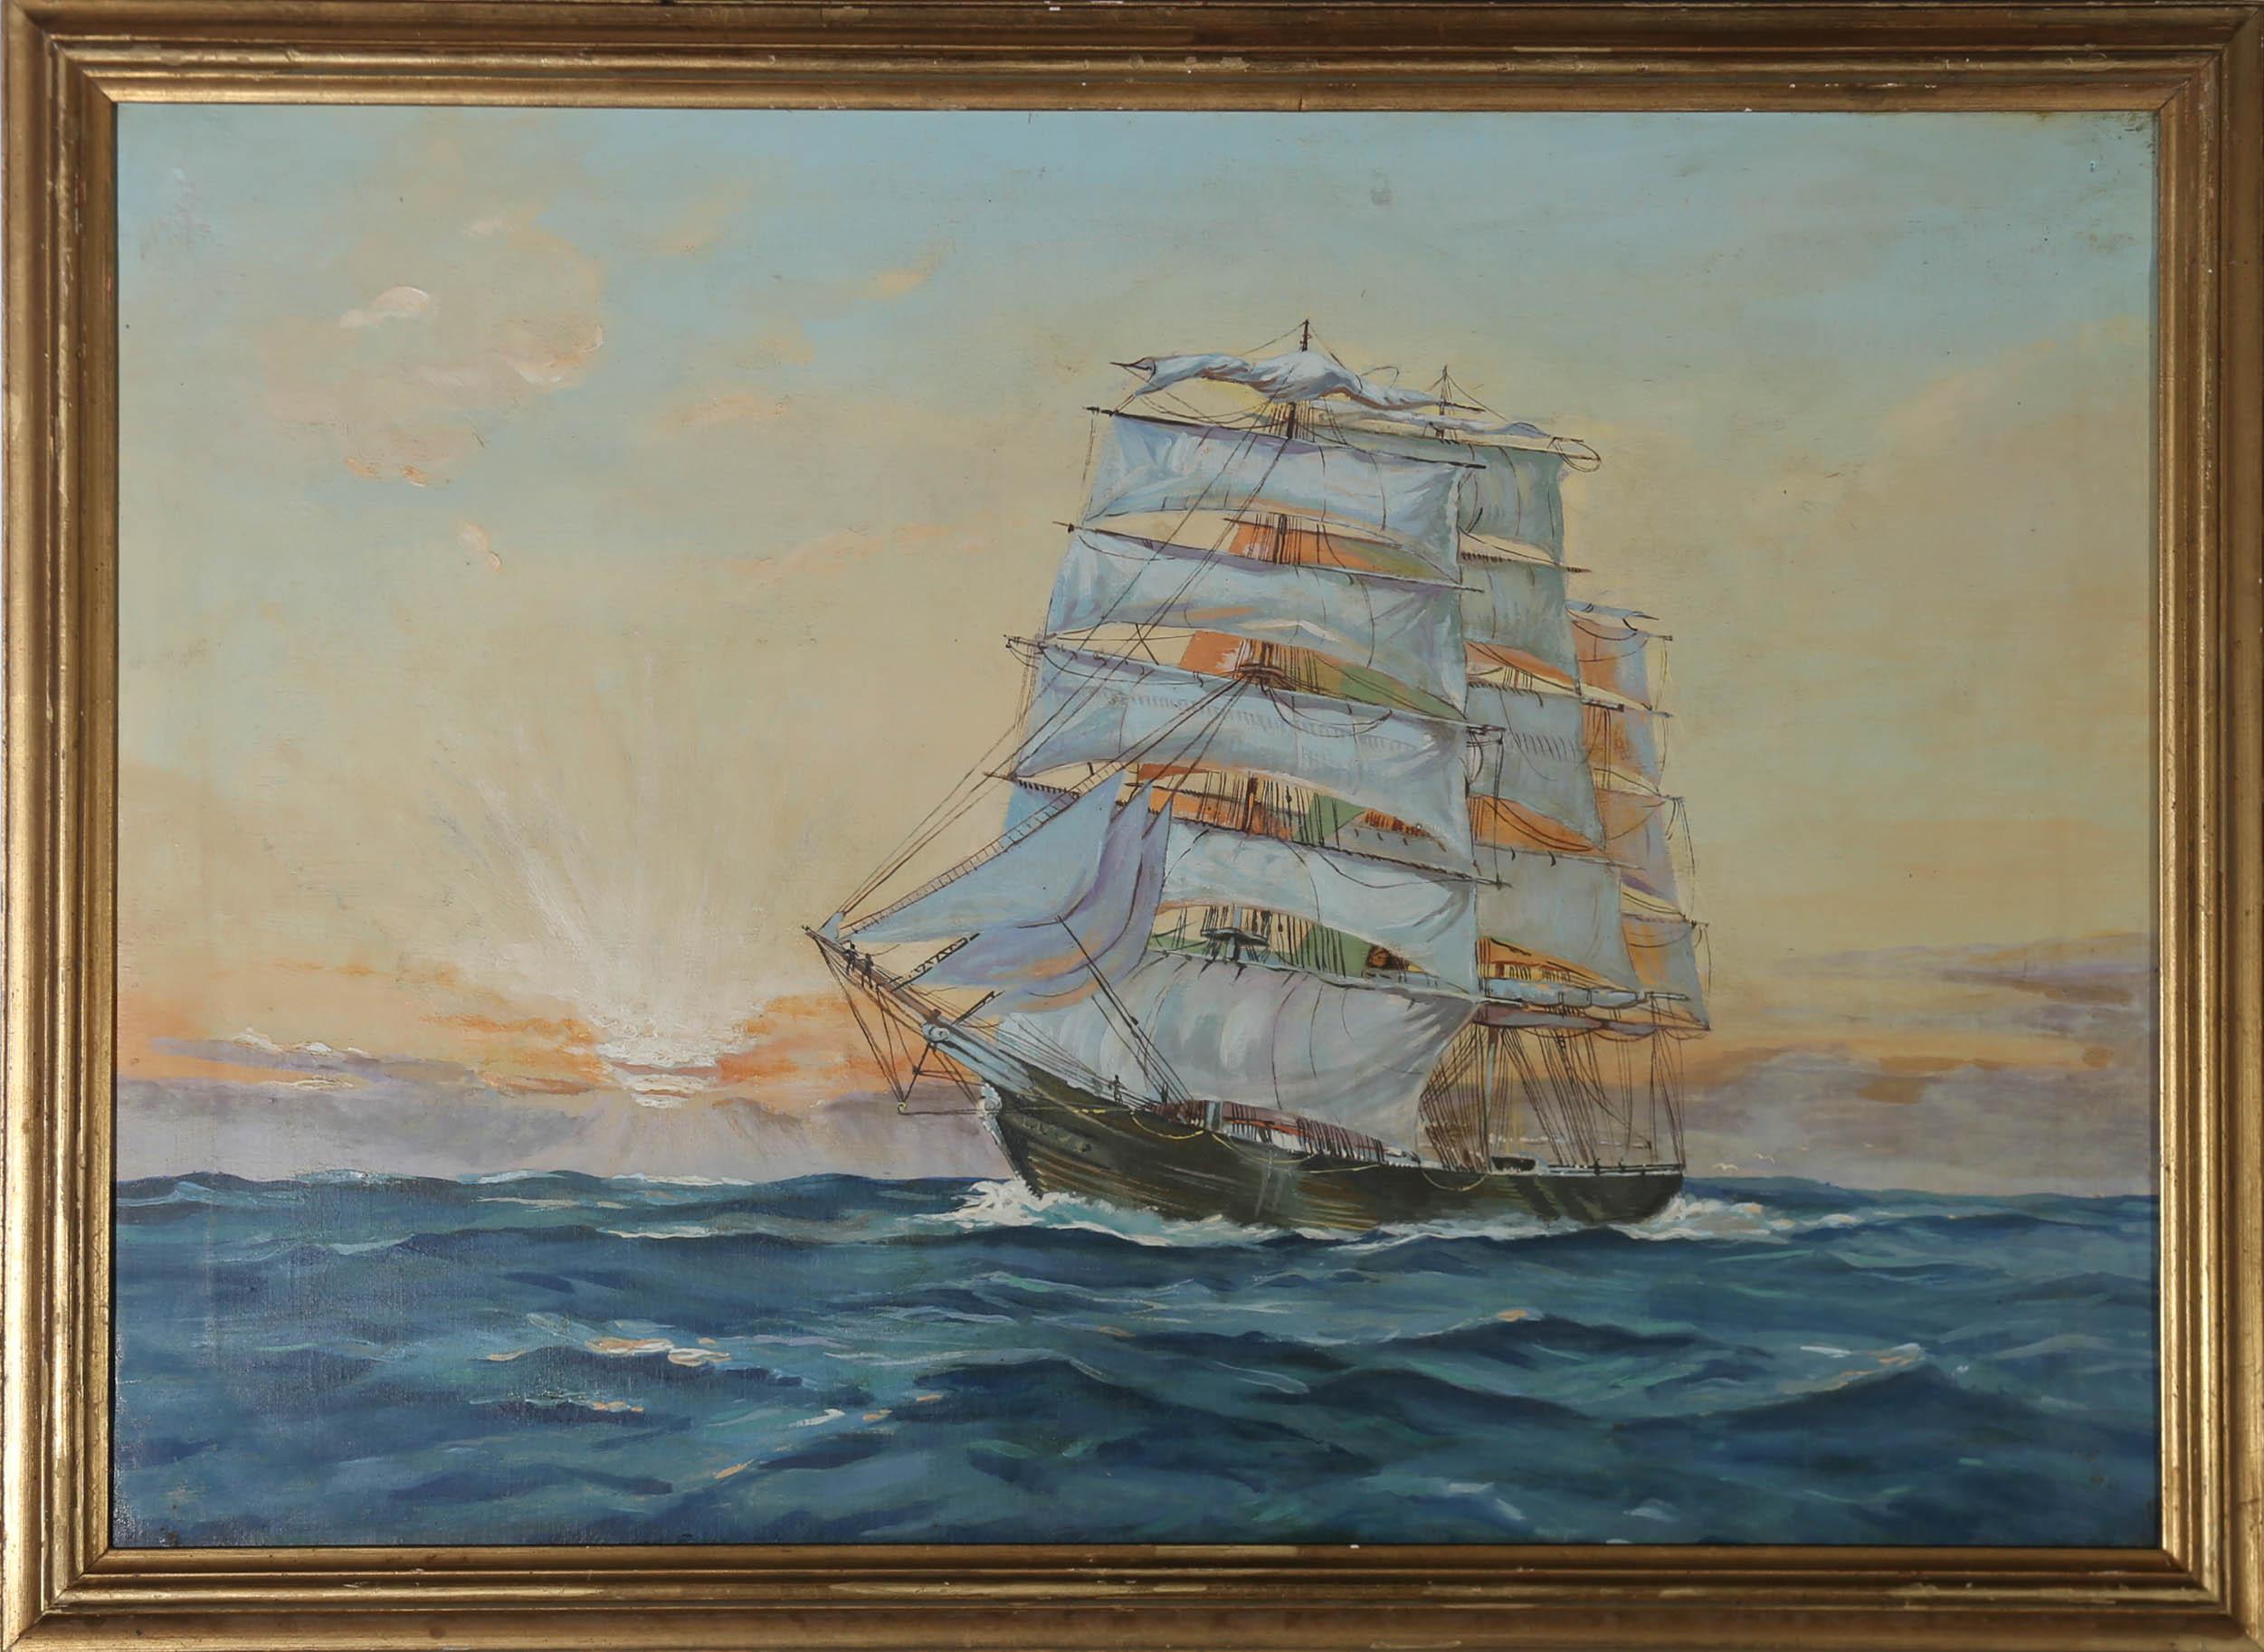 Unknown Figurative Painting - 19th Century Oil - Frigate at Sunset